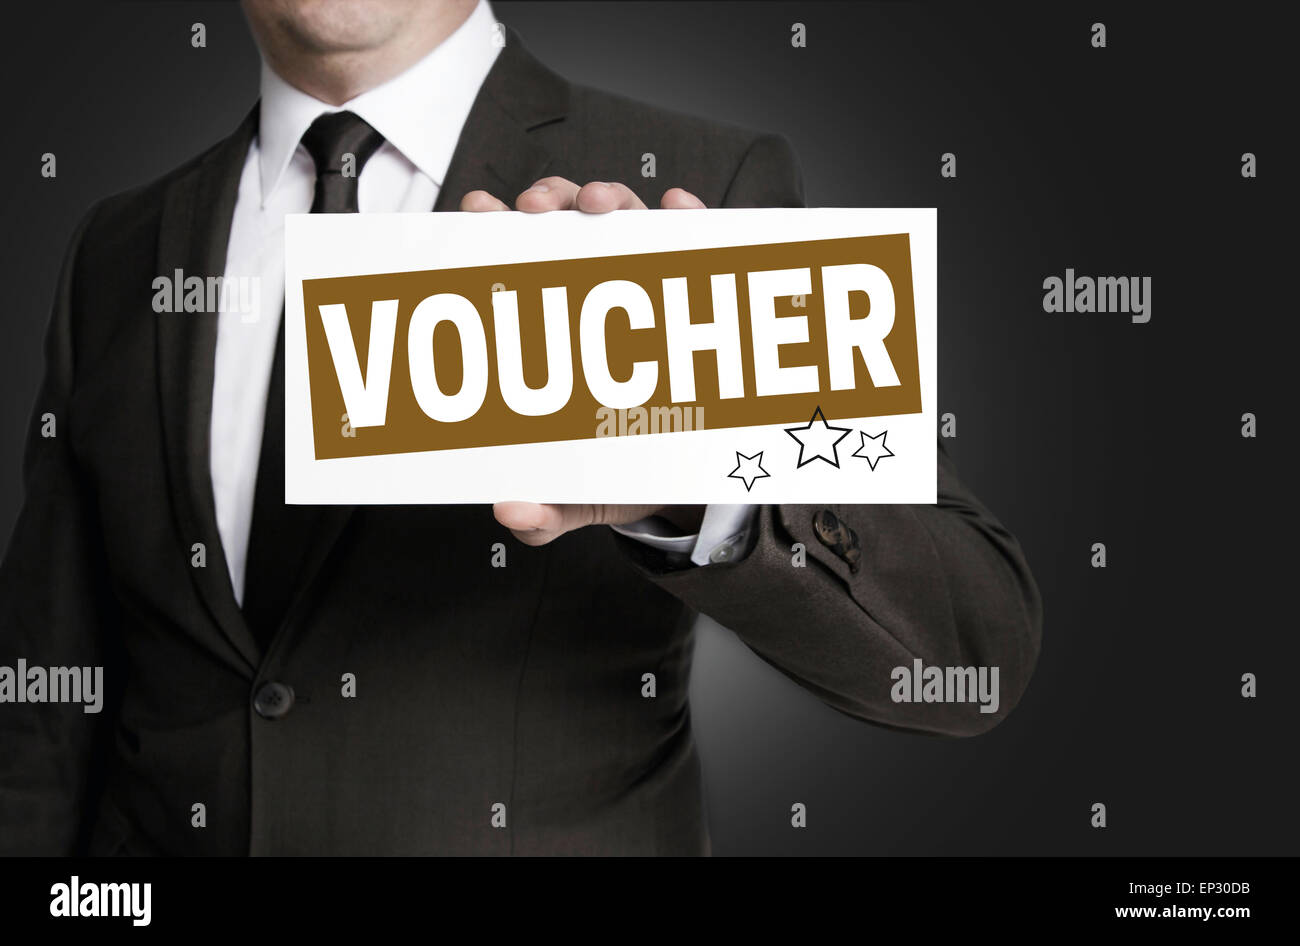 Voucher sign is held by businessman. Stock Photo